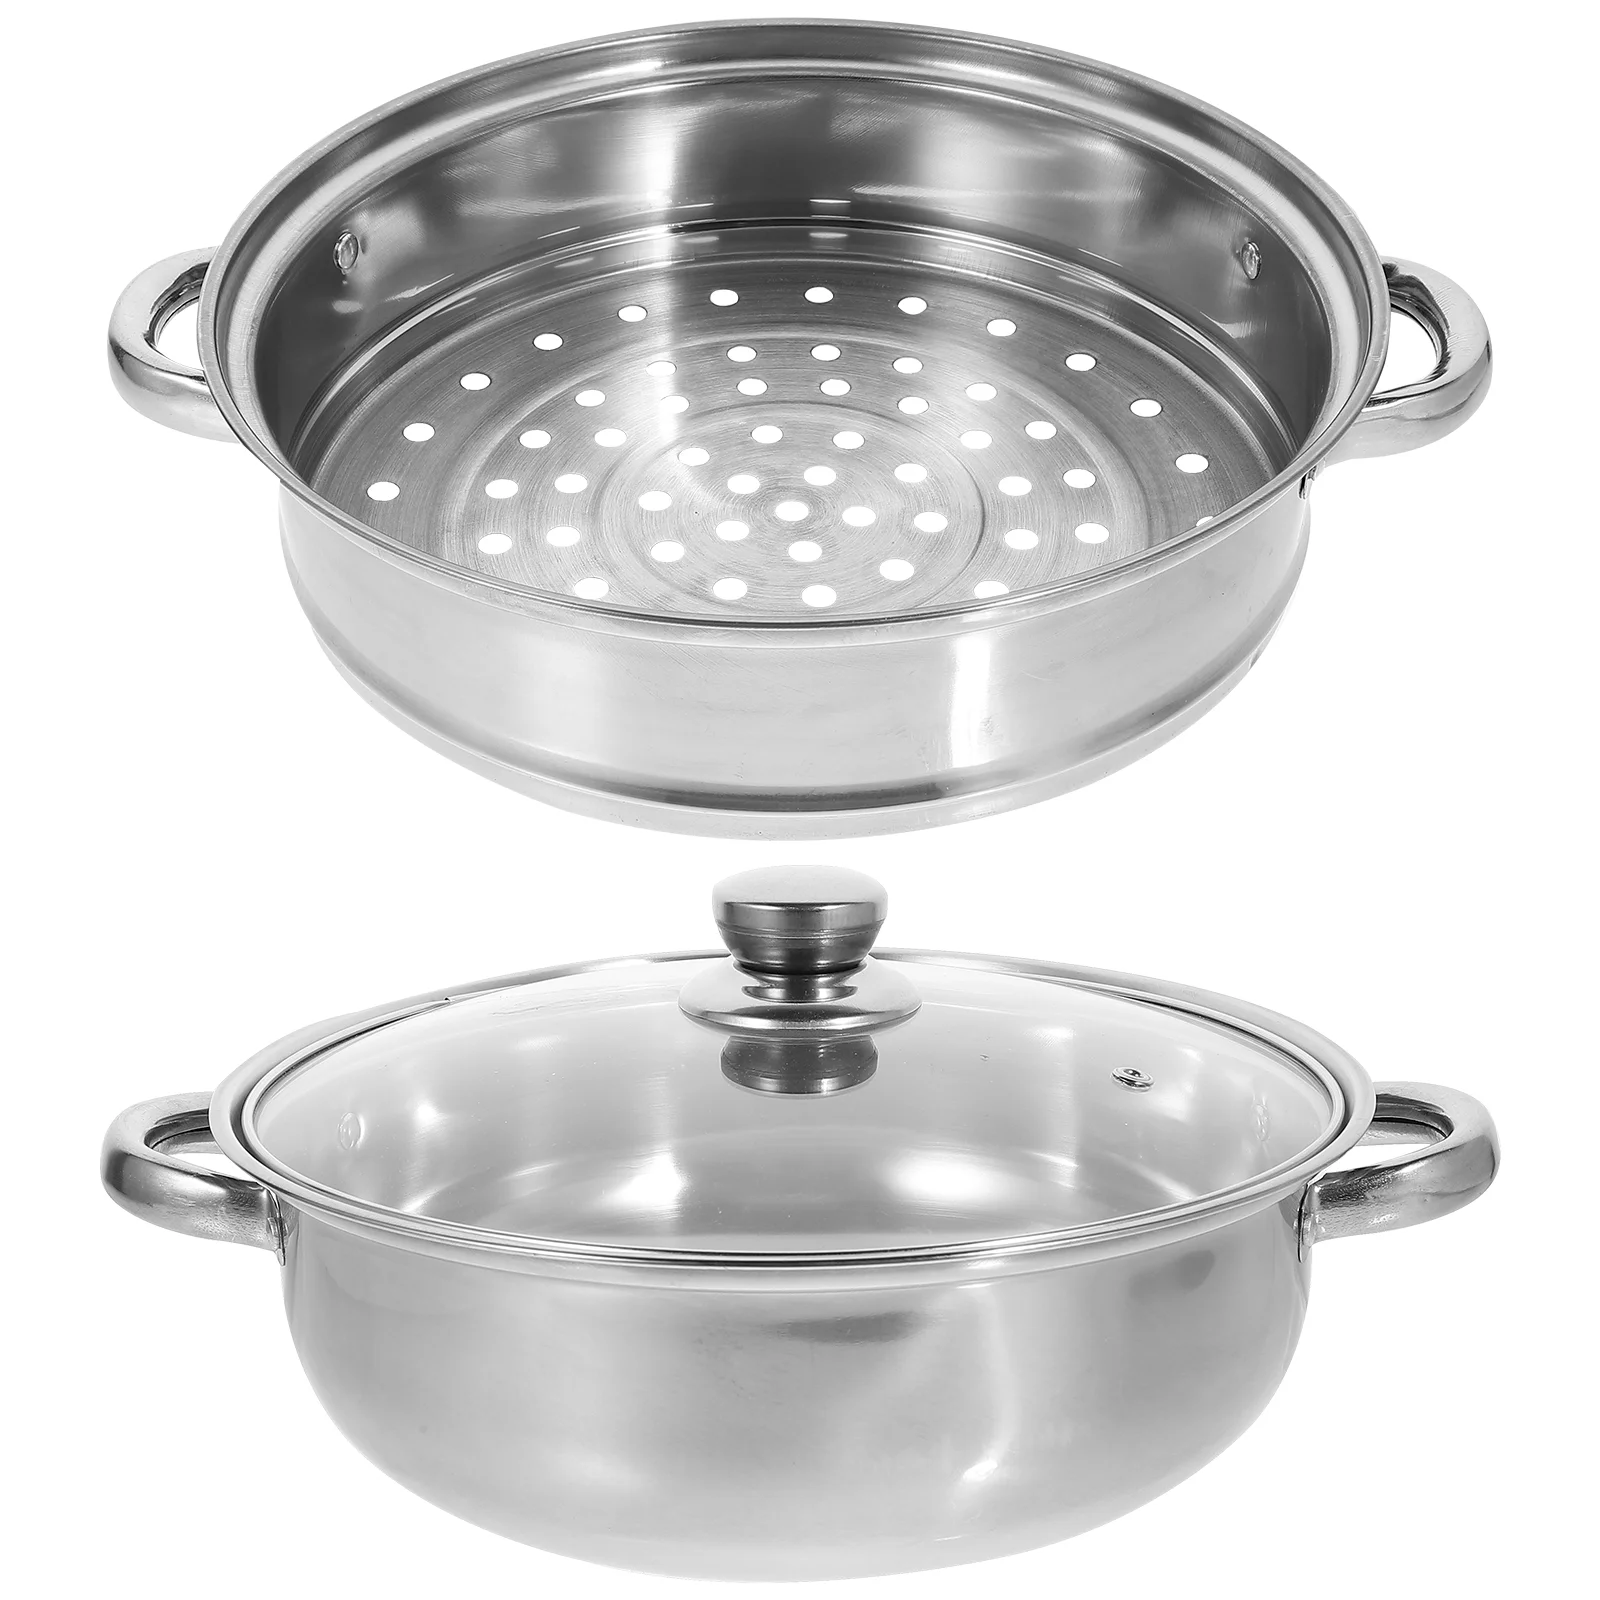 

Stainless Steel Steamer Pot Cooking Reusable Asian Cookware Soup Basket Food Home Lidded Egg Boiler For coooking